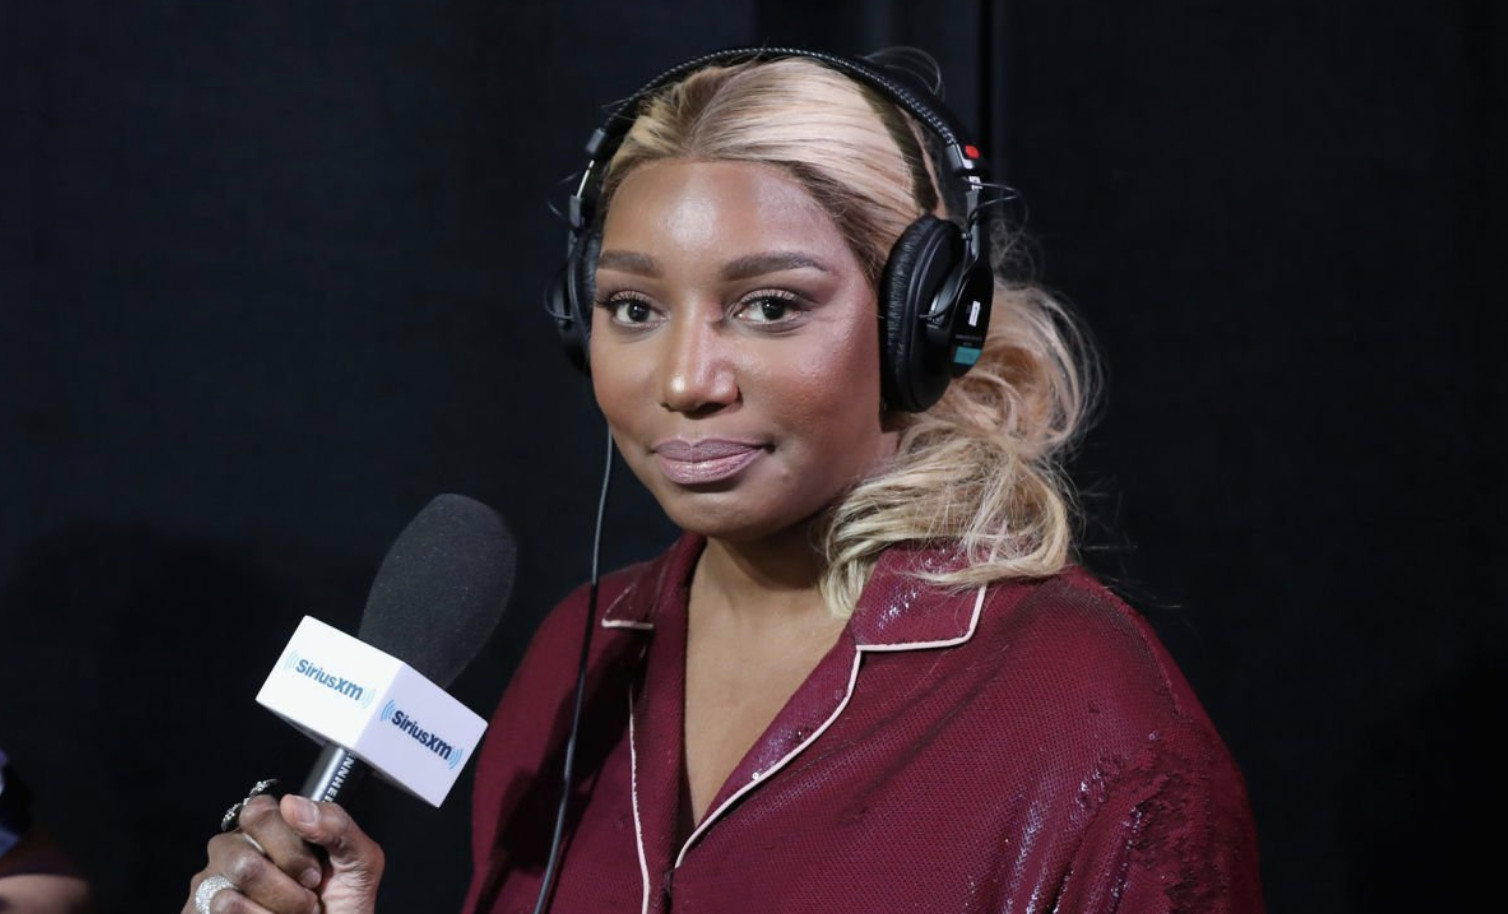 Nene Leakes Claims She’s Been “Blacklisted” & Is Being Followed, Harassed